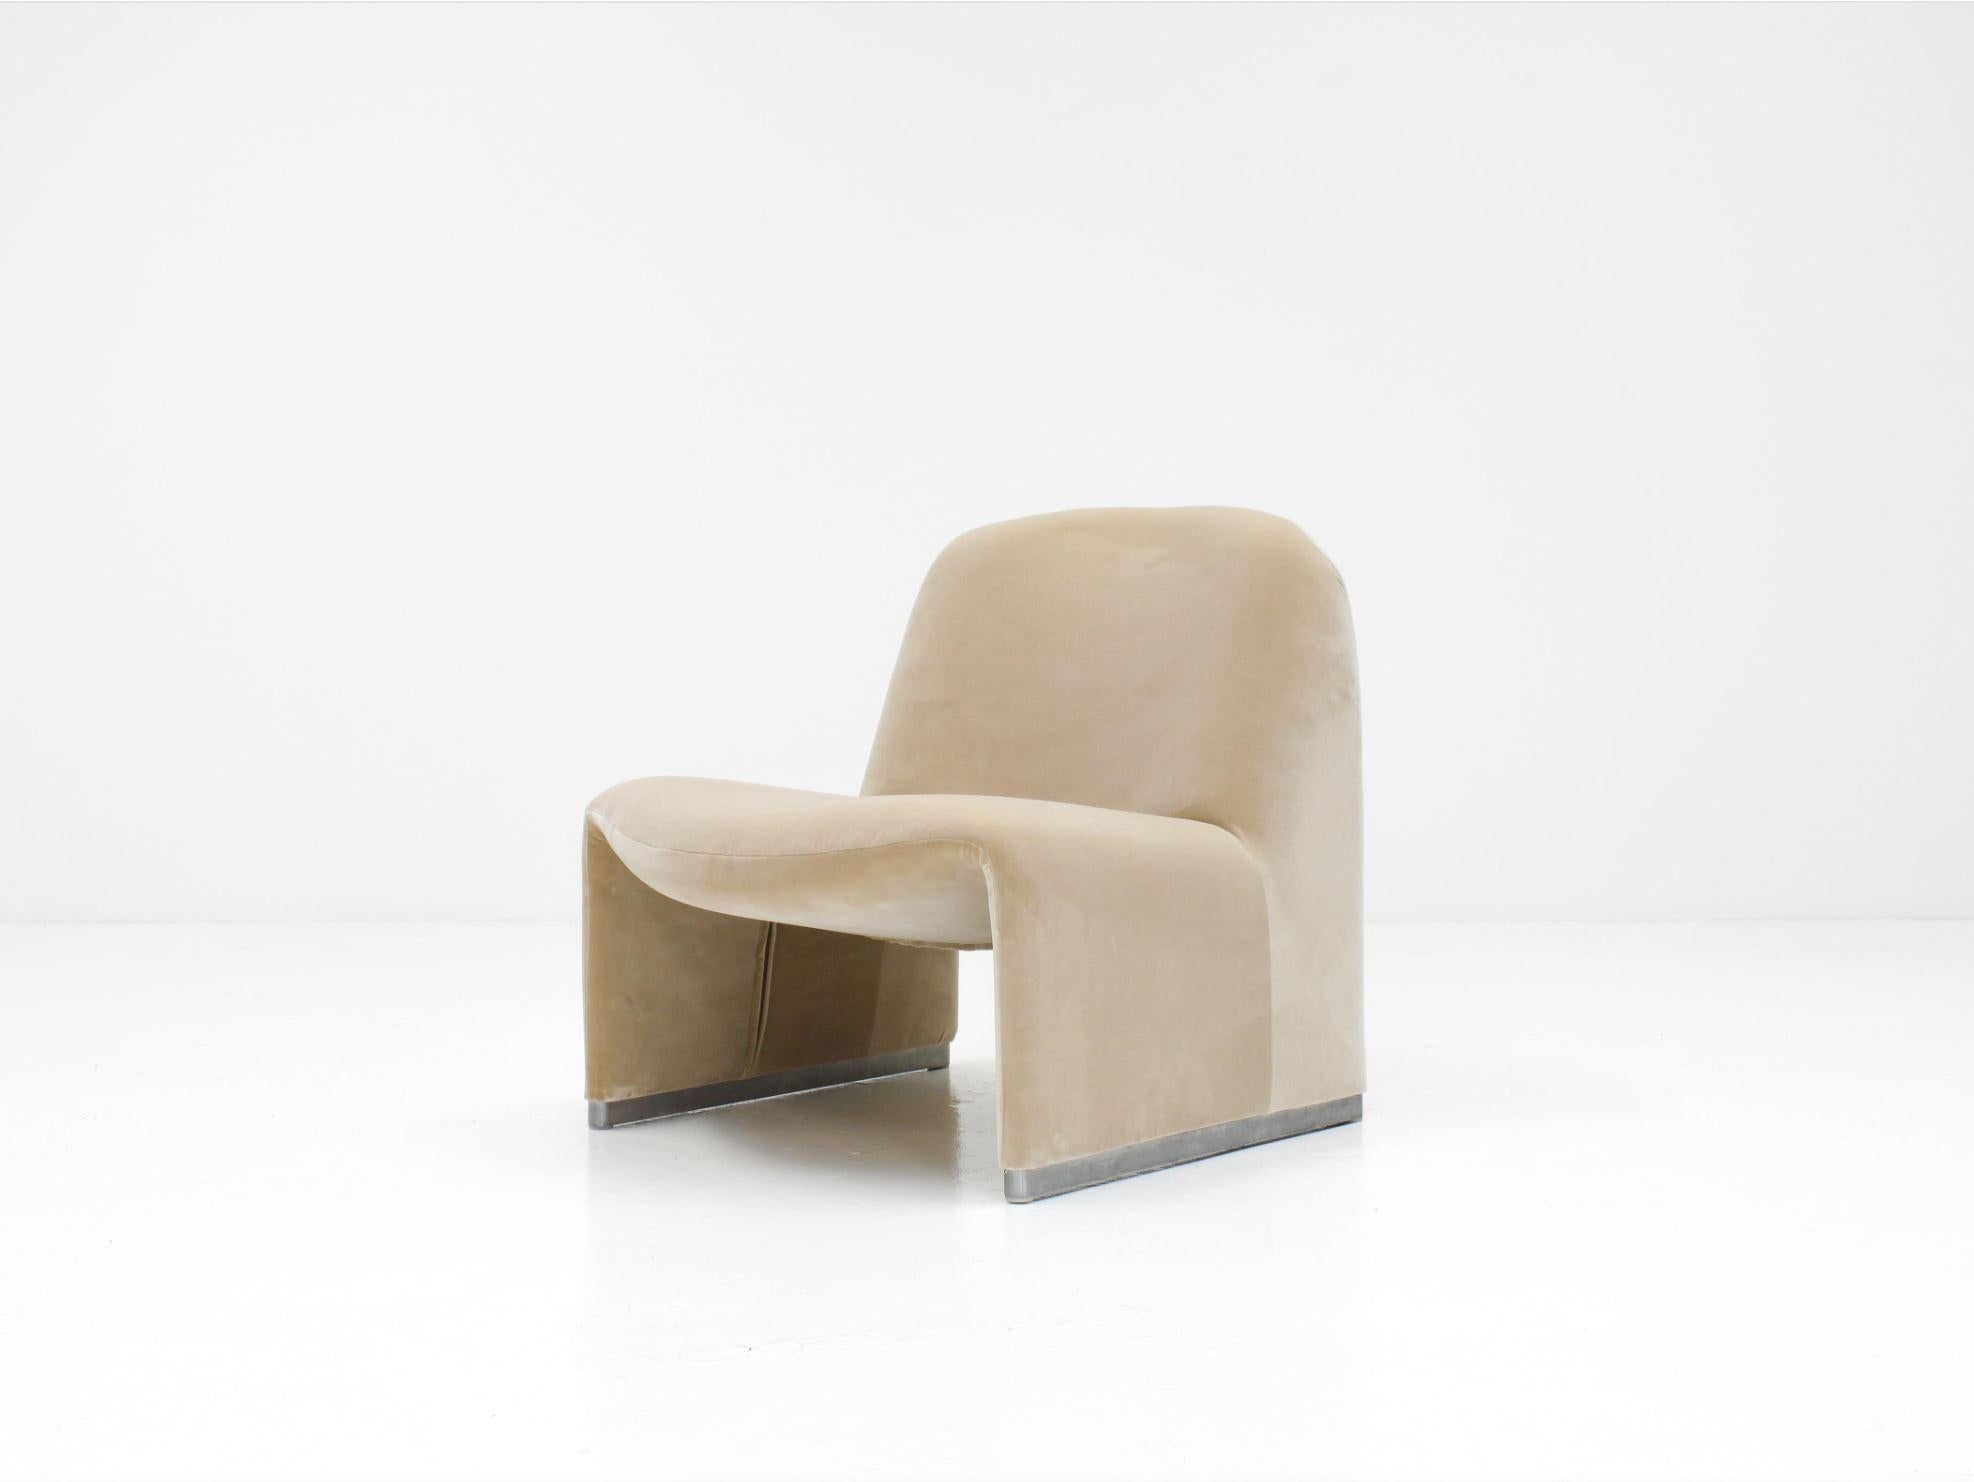 A single Giancarlo Piretti “Alky” chair newly upholstered in Designers Guild linen-colored cotton velvet. 

Manufactured by Artifort in the 1970s.

The organic shape offers a minimal appearance but also comfort which makes these chairs so in-demand